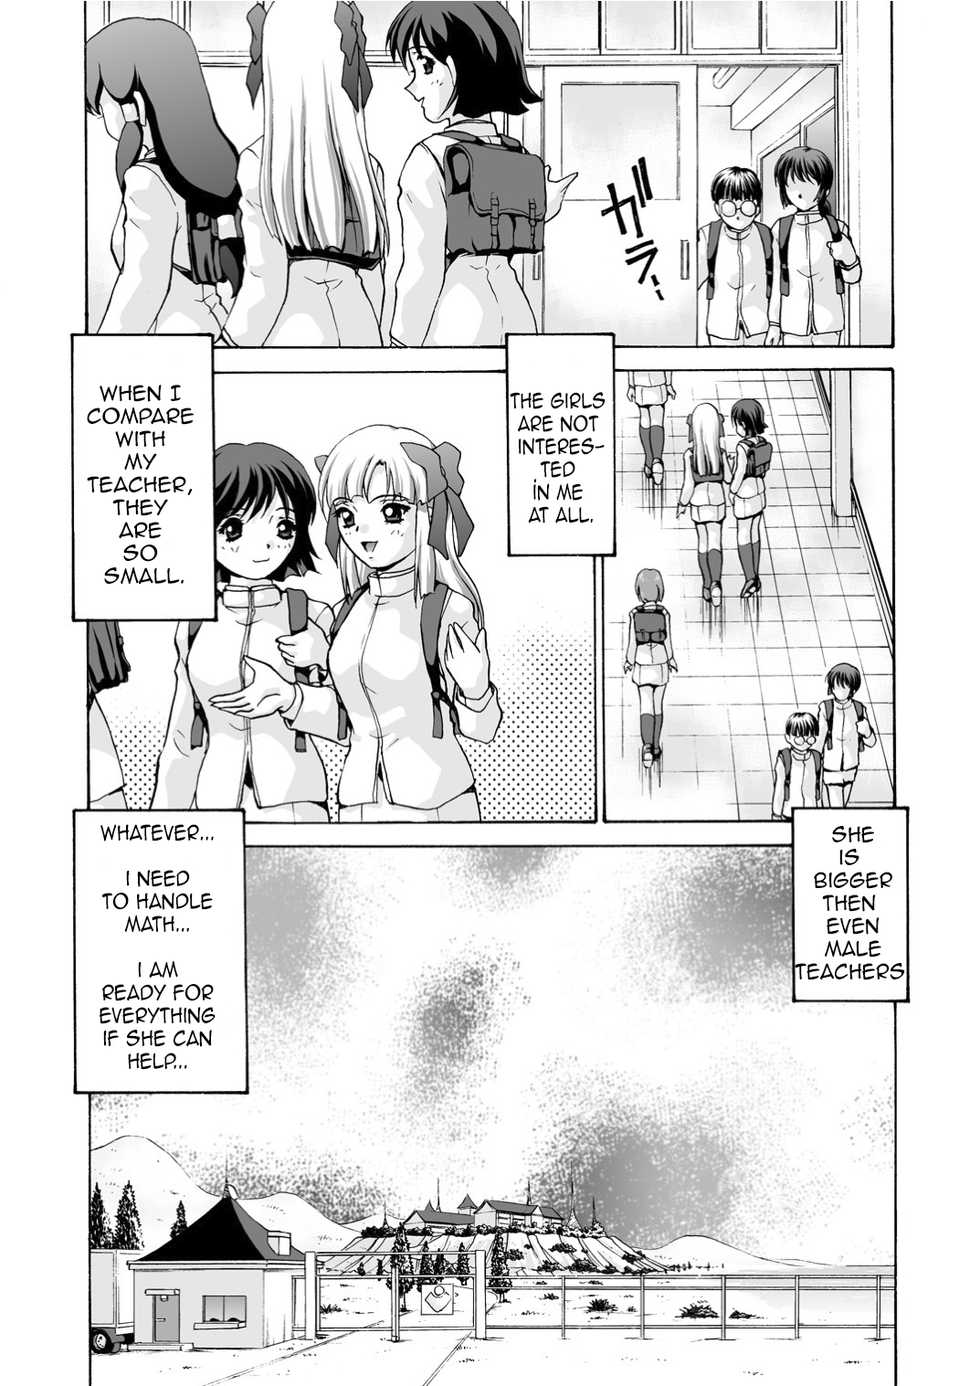 An Injection of Miss Mamiko [English] [Rewrite] [Drages] [Decensored] - Page 6